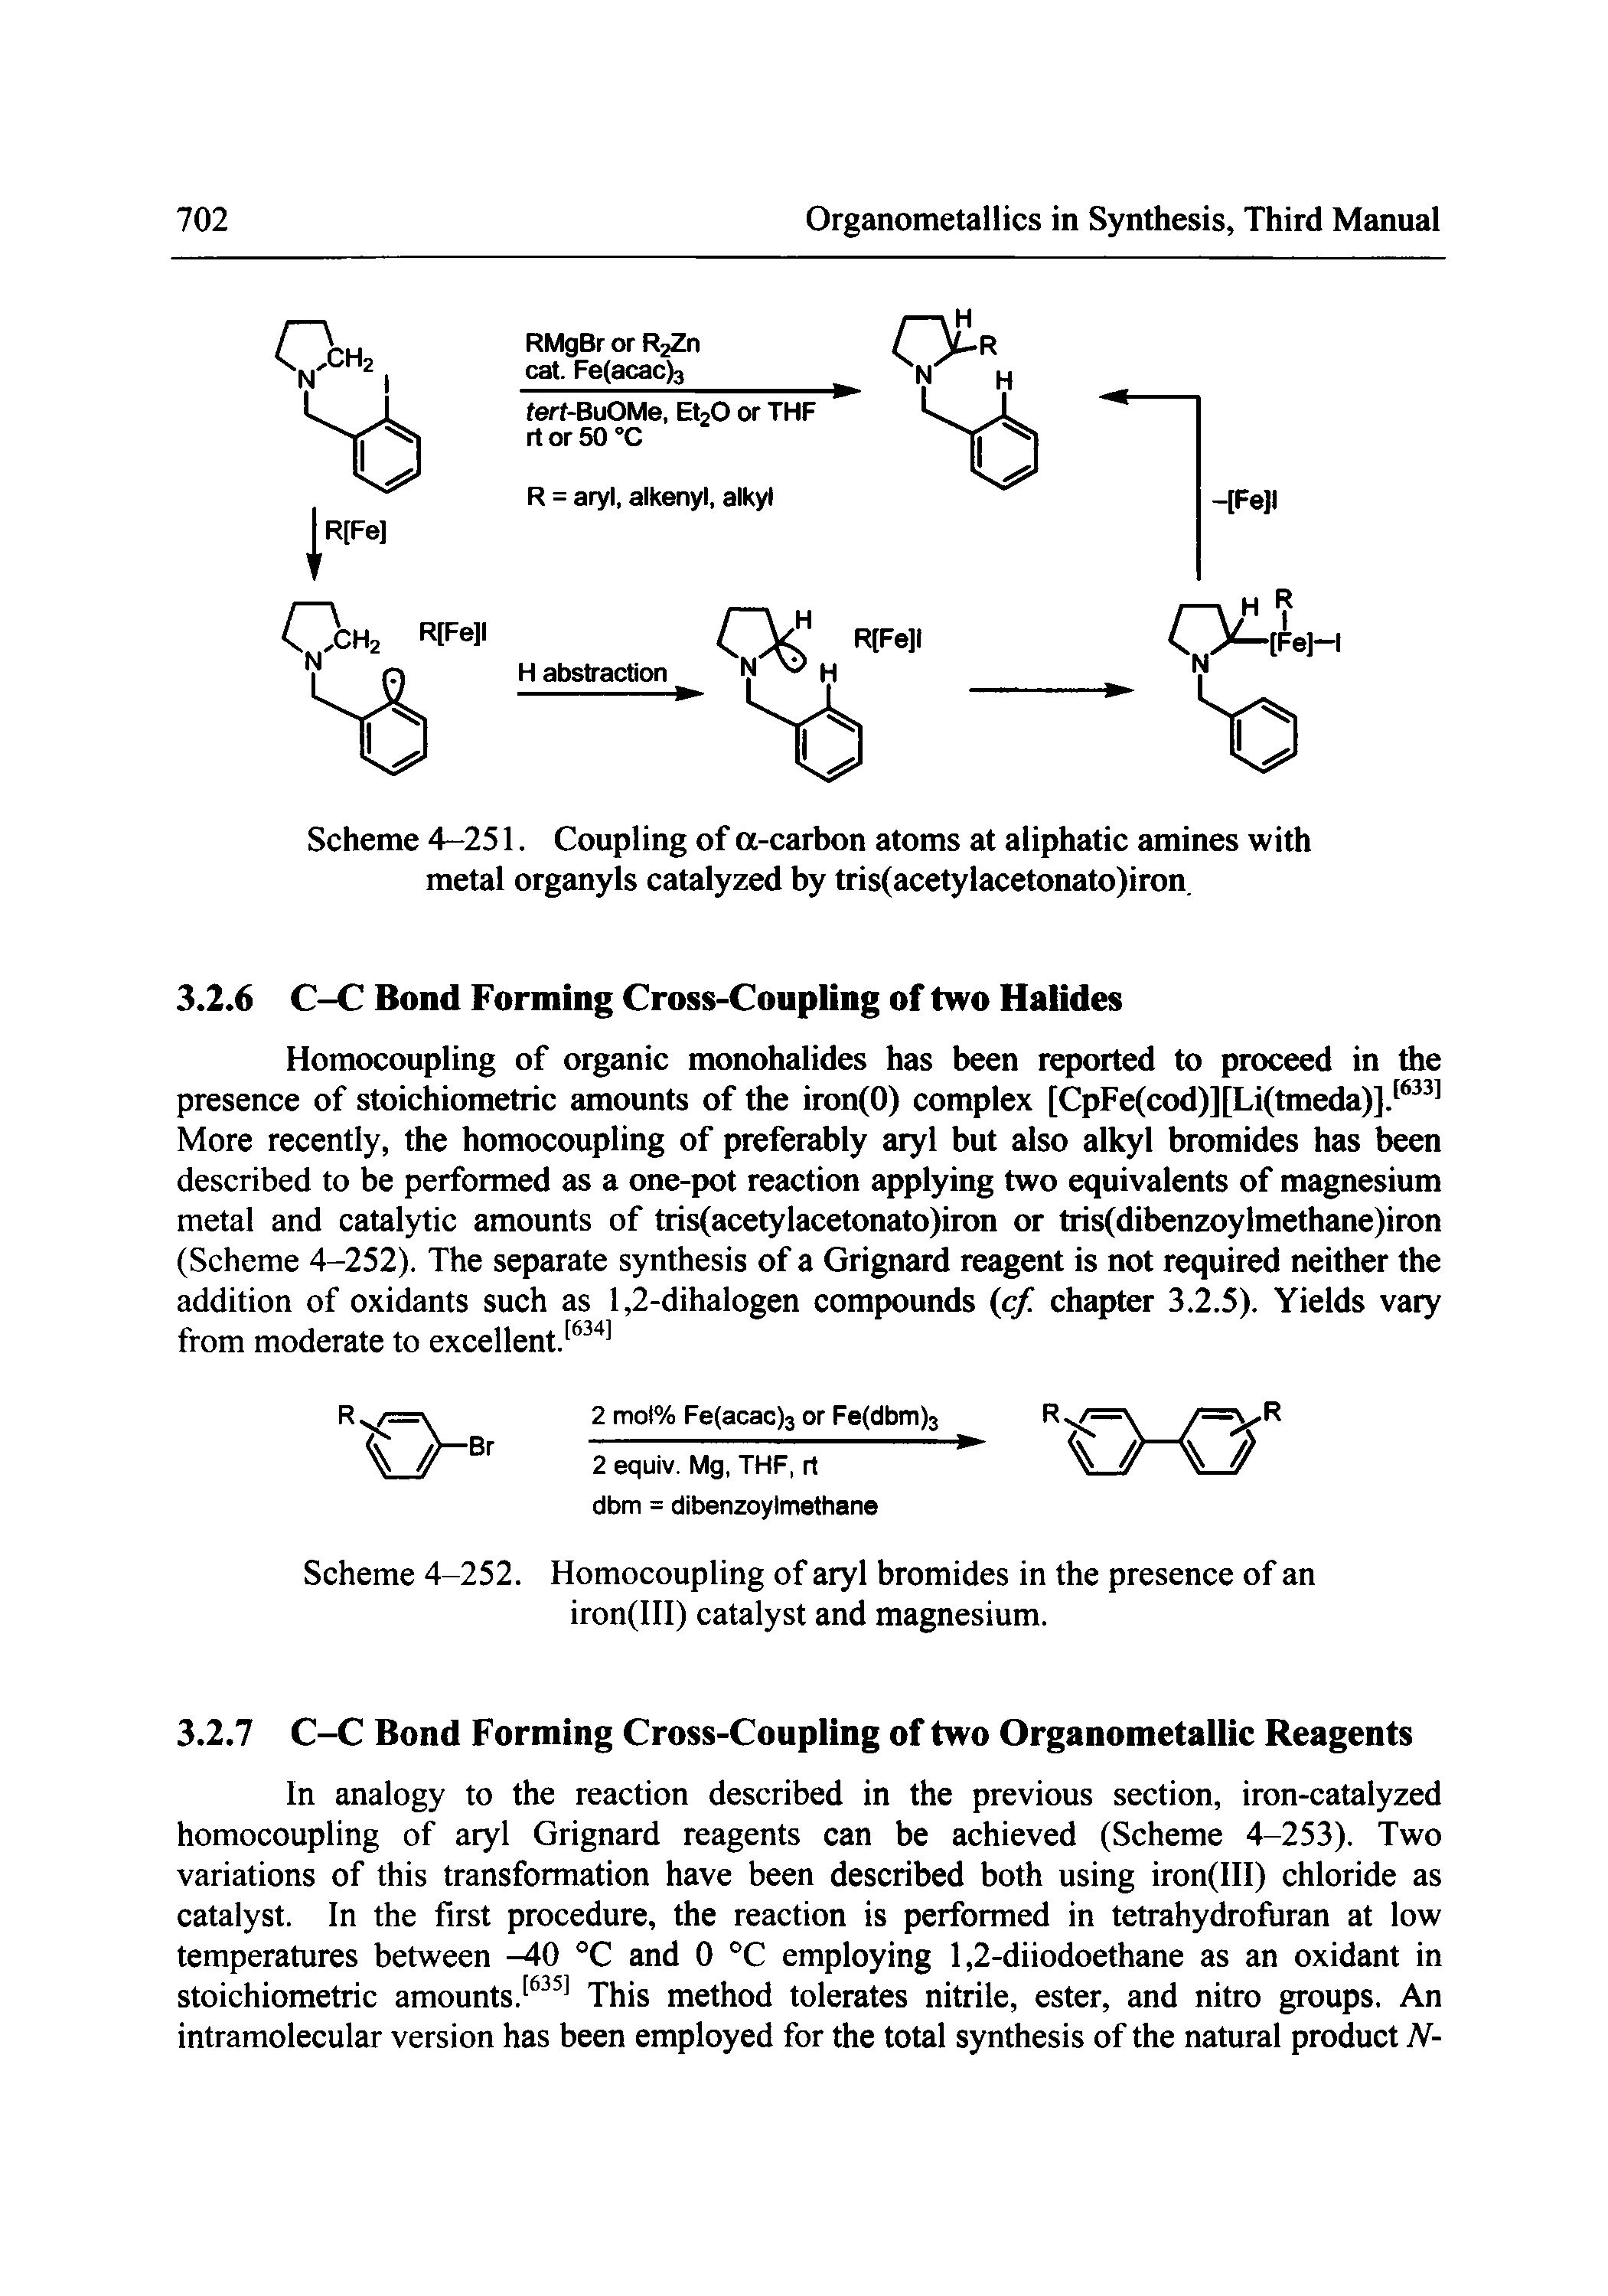 Scheme 4-251. Coupling of a-carbon atoms at aliphatic amines with metal organyls catalyzed by tris(acetylacetonato)iron.